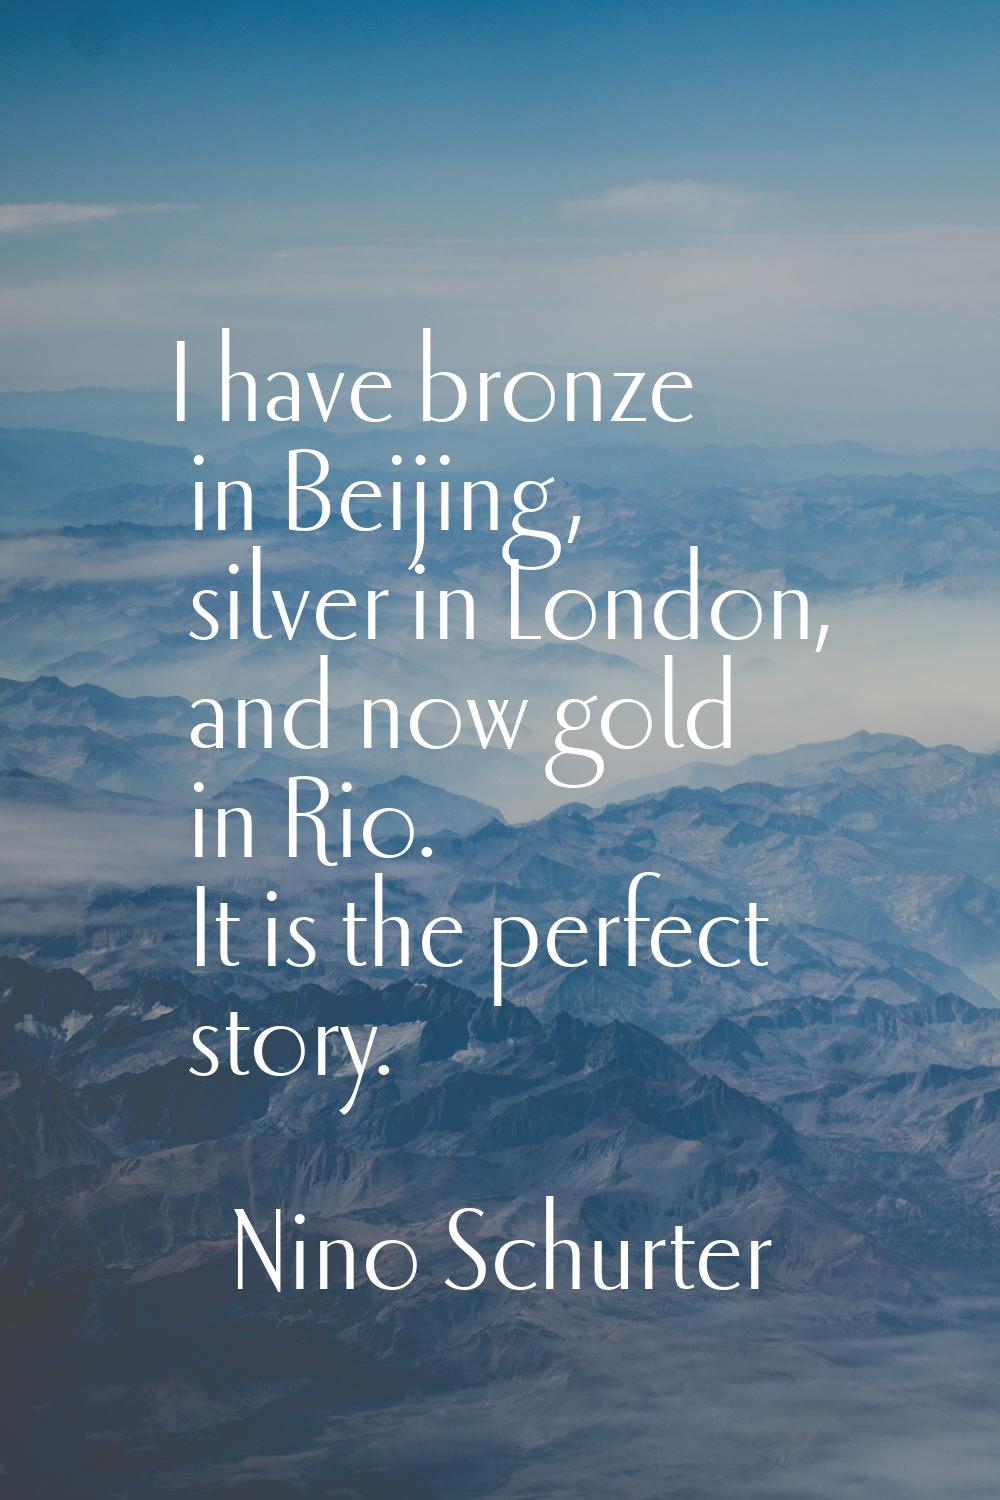 I have bronze in Beijing, silver in London, and now gold in Rio. It is the perfect story.